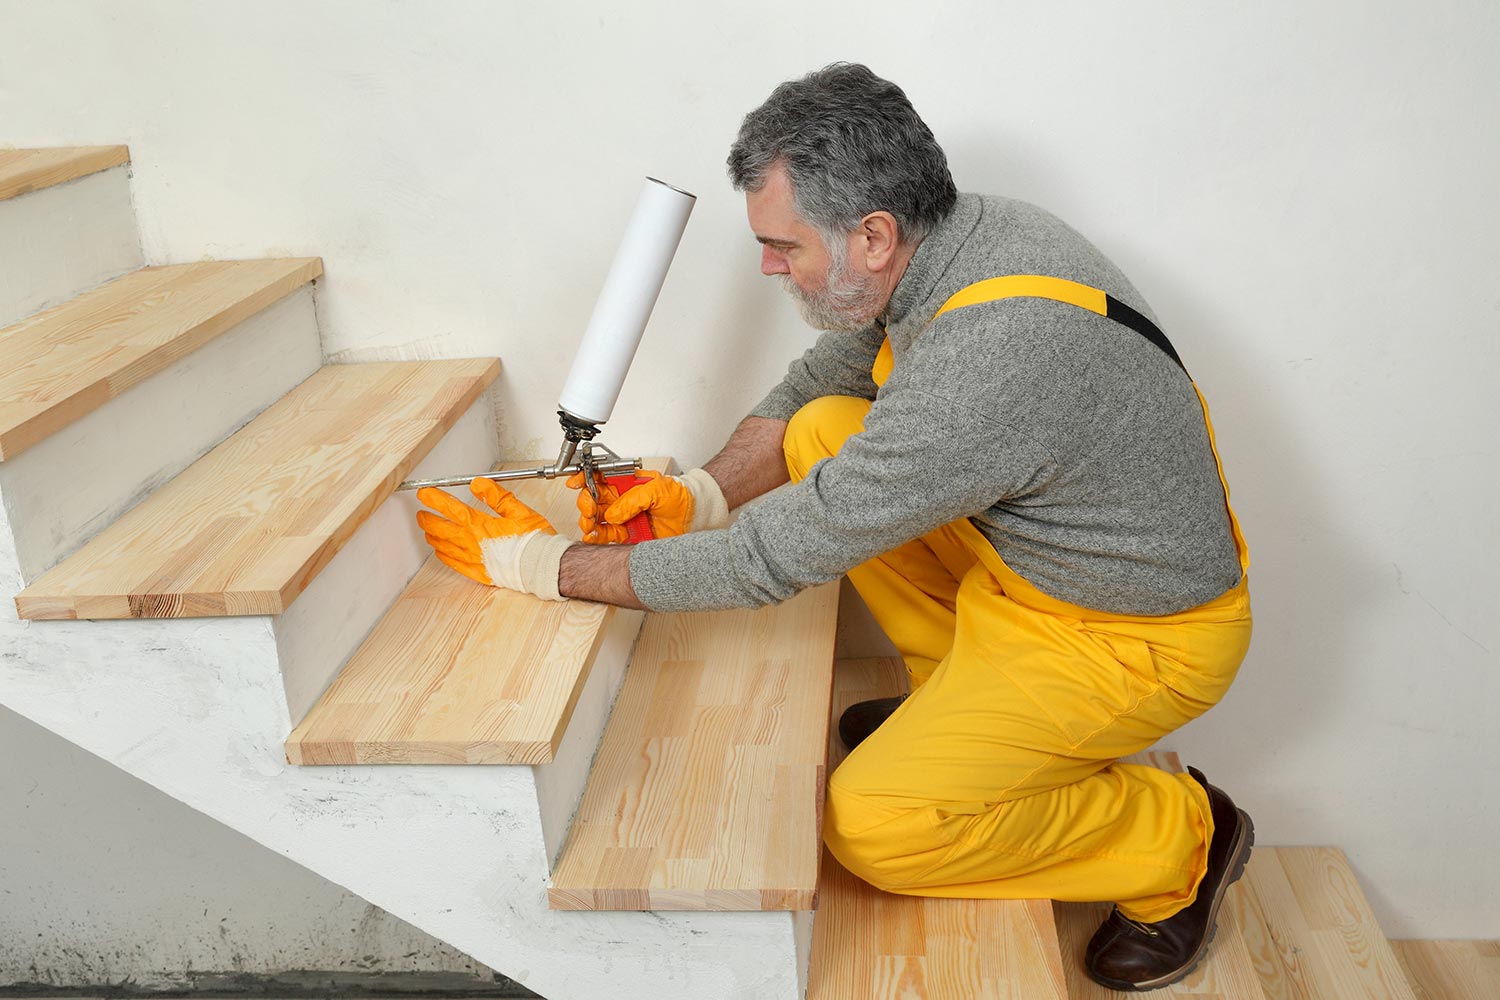 Construction worker fixing wooden stairs with polyurethane spray gun